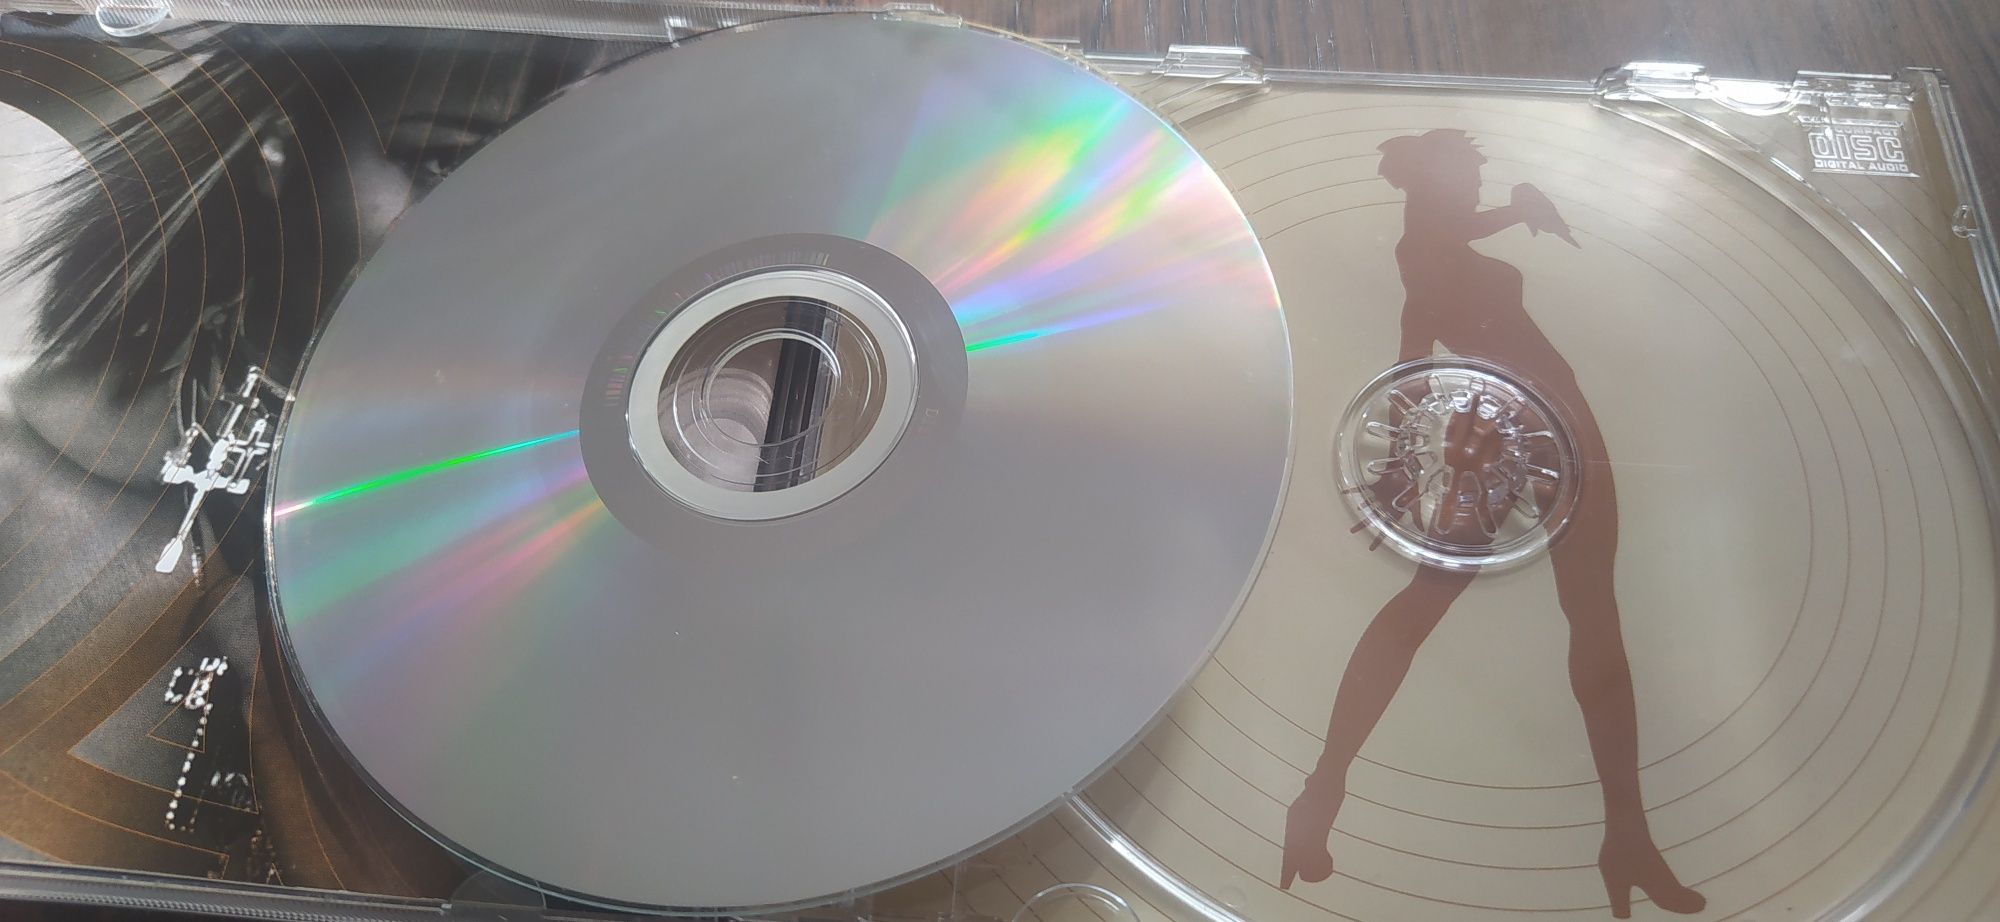 SoniQue born to be free CD